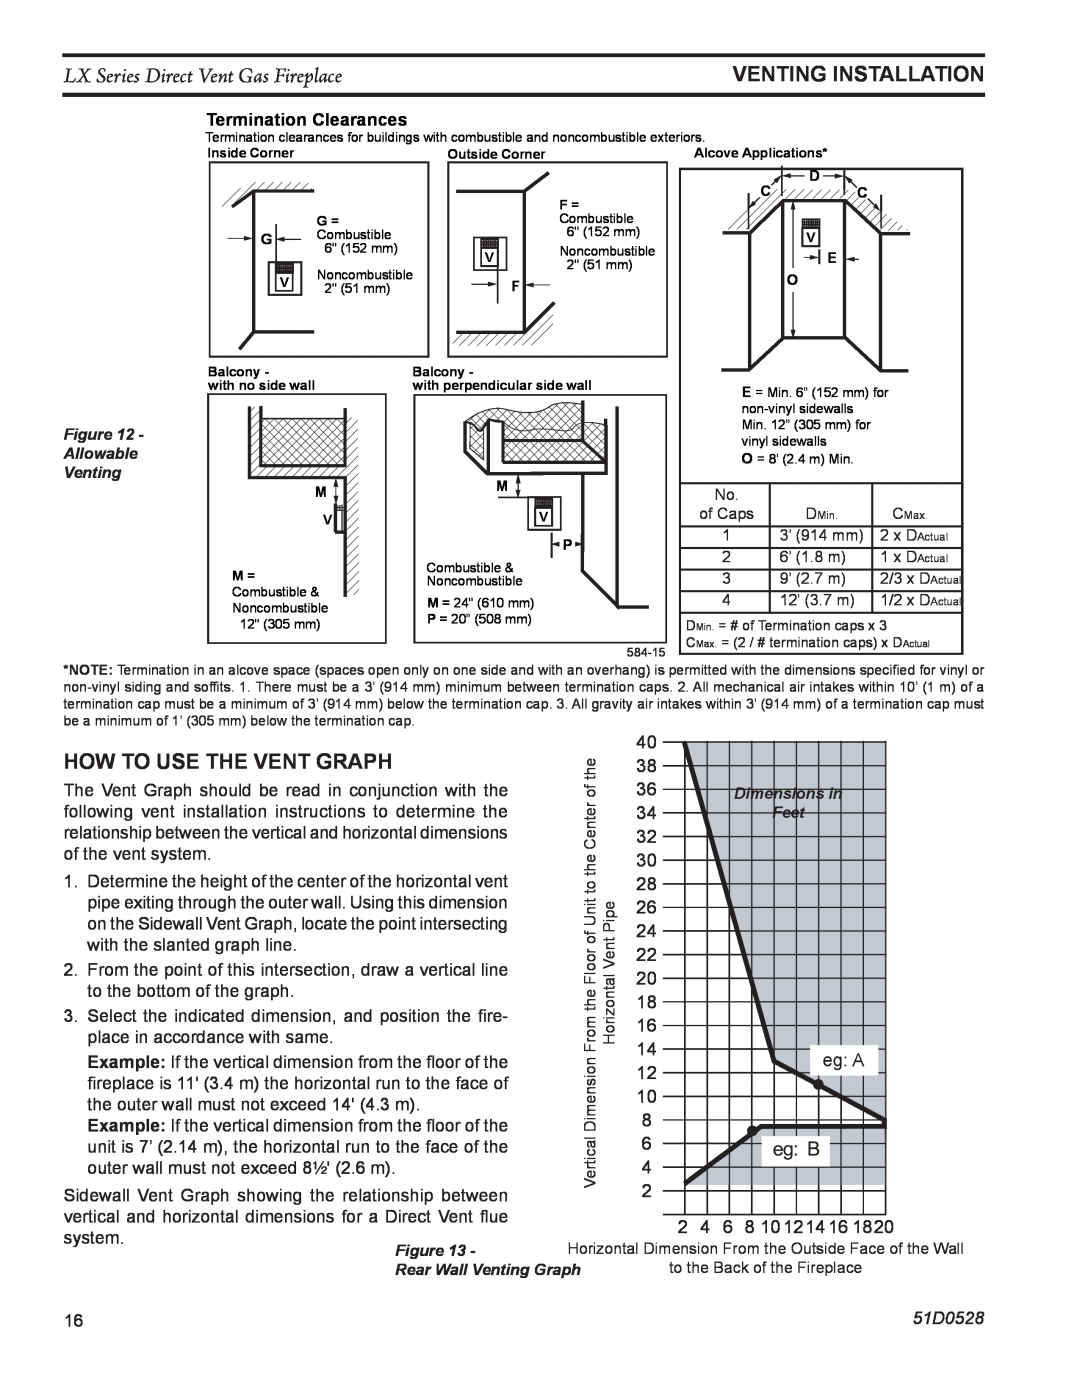 Monessen Hearth LX36DV How To Use The Vent Graph, LX Series Direct Vent Gas Fireplace, Termination Clearances, eg A 